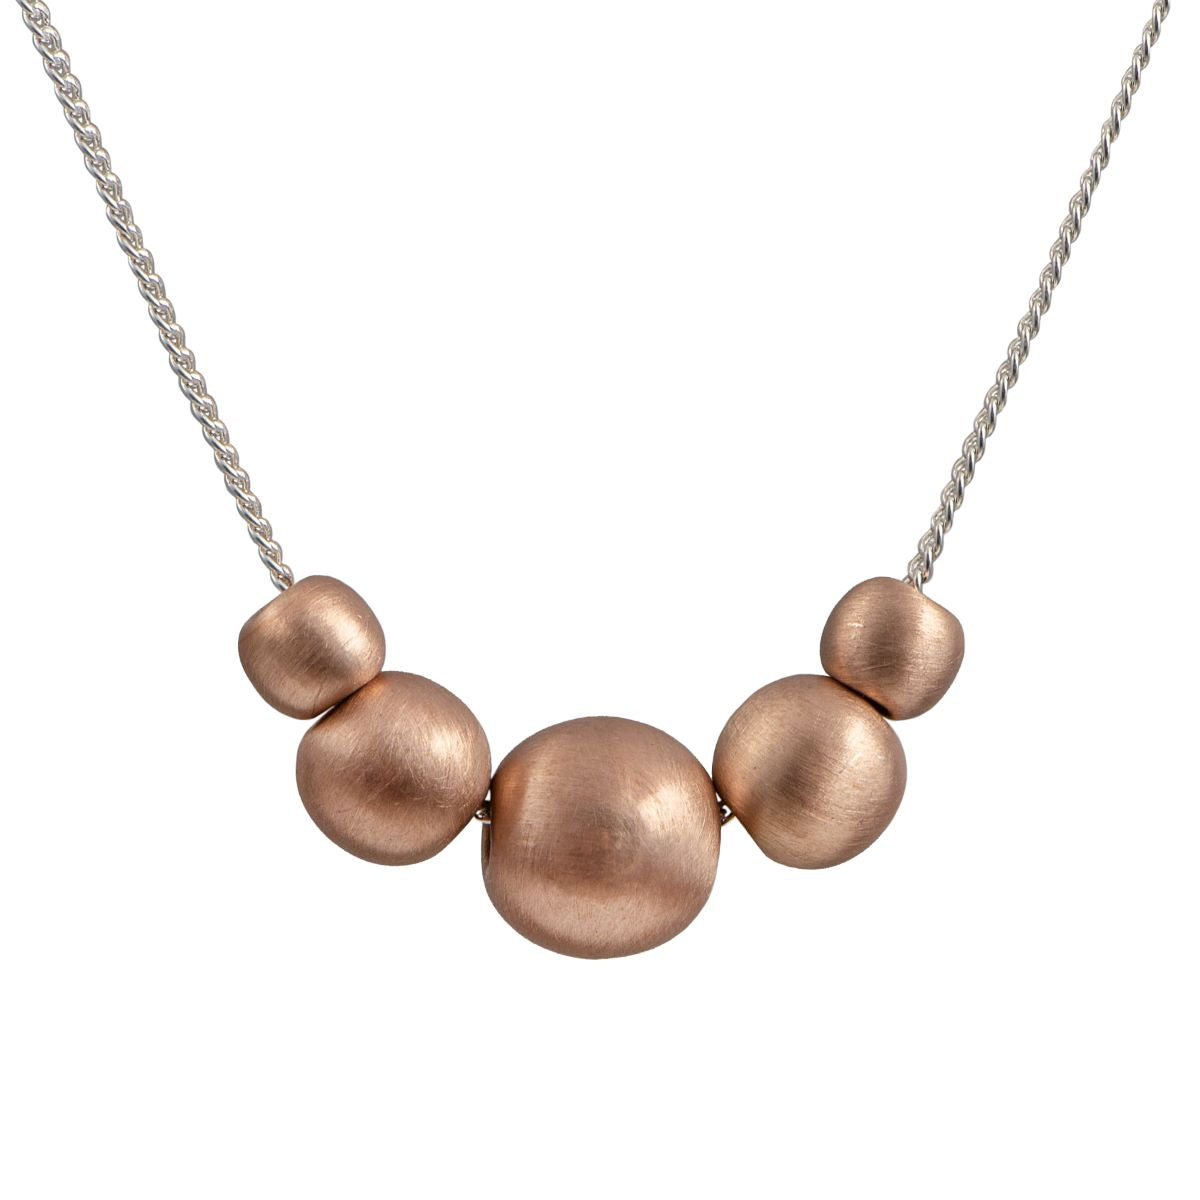 Brushed Rose Gold Plated Sterling Silver Necklace with 5 Balls